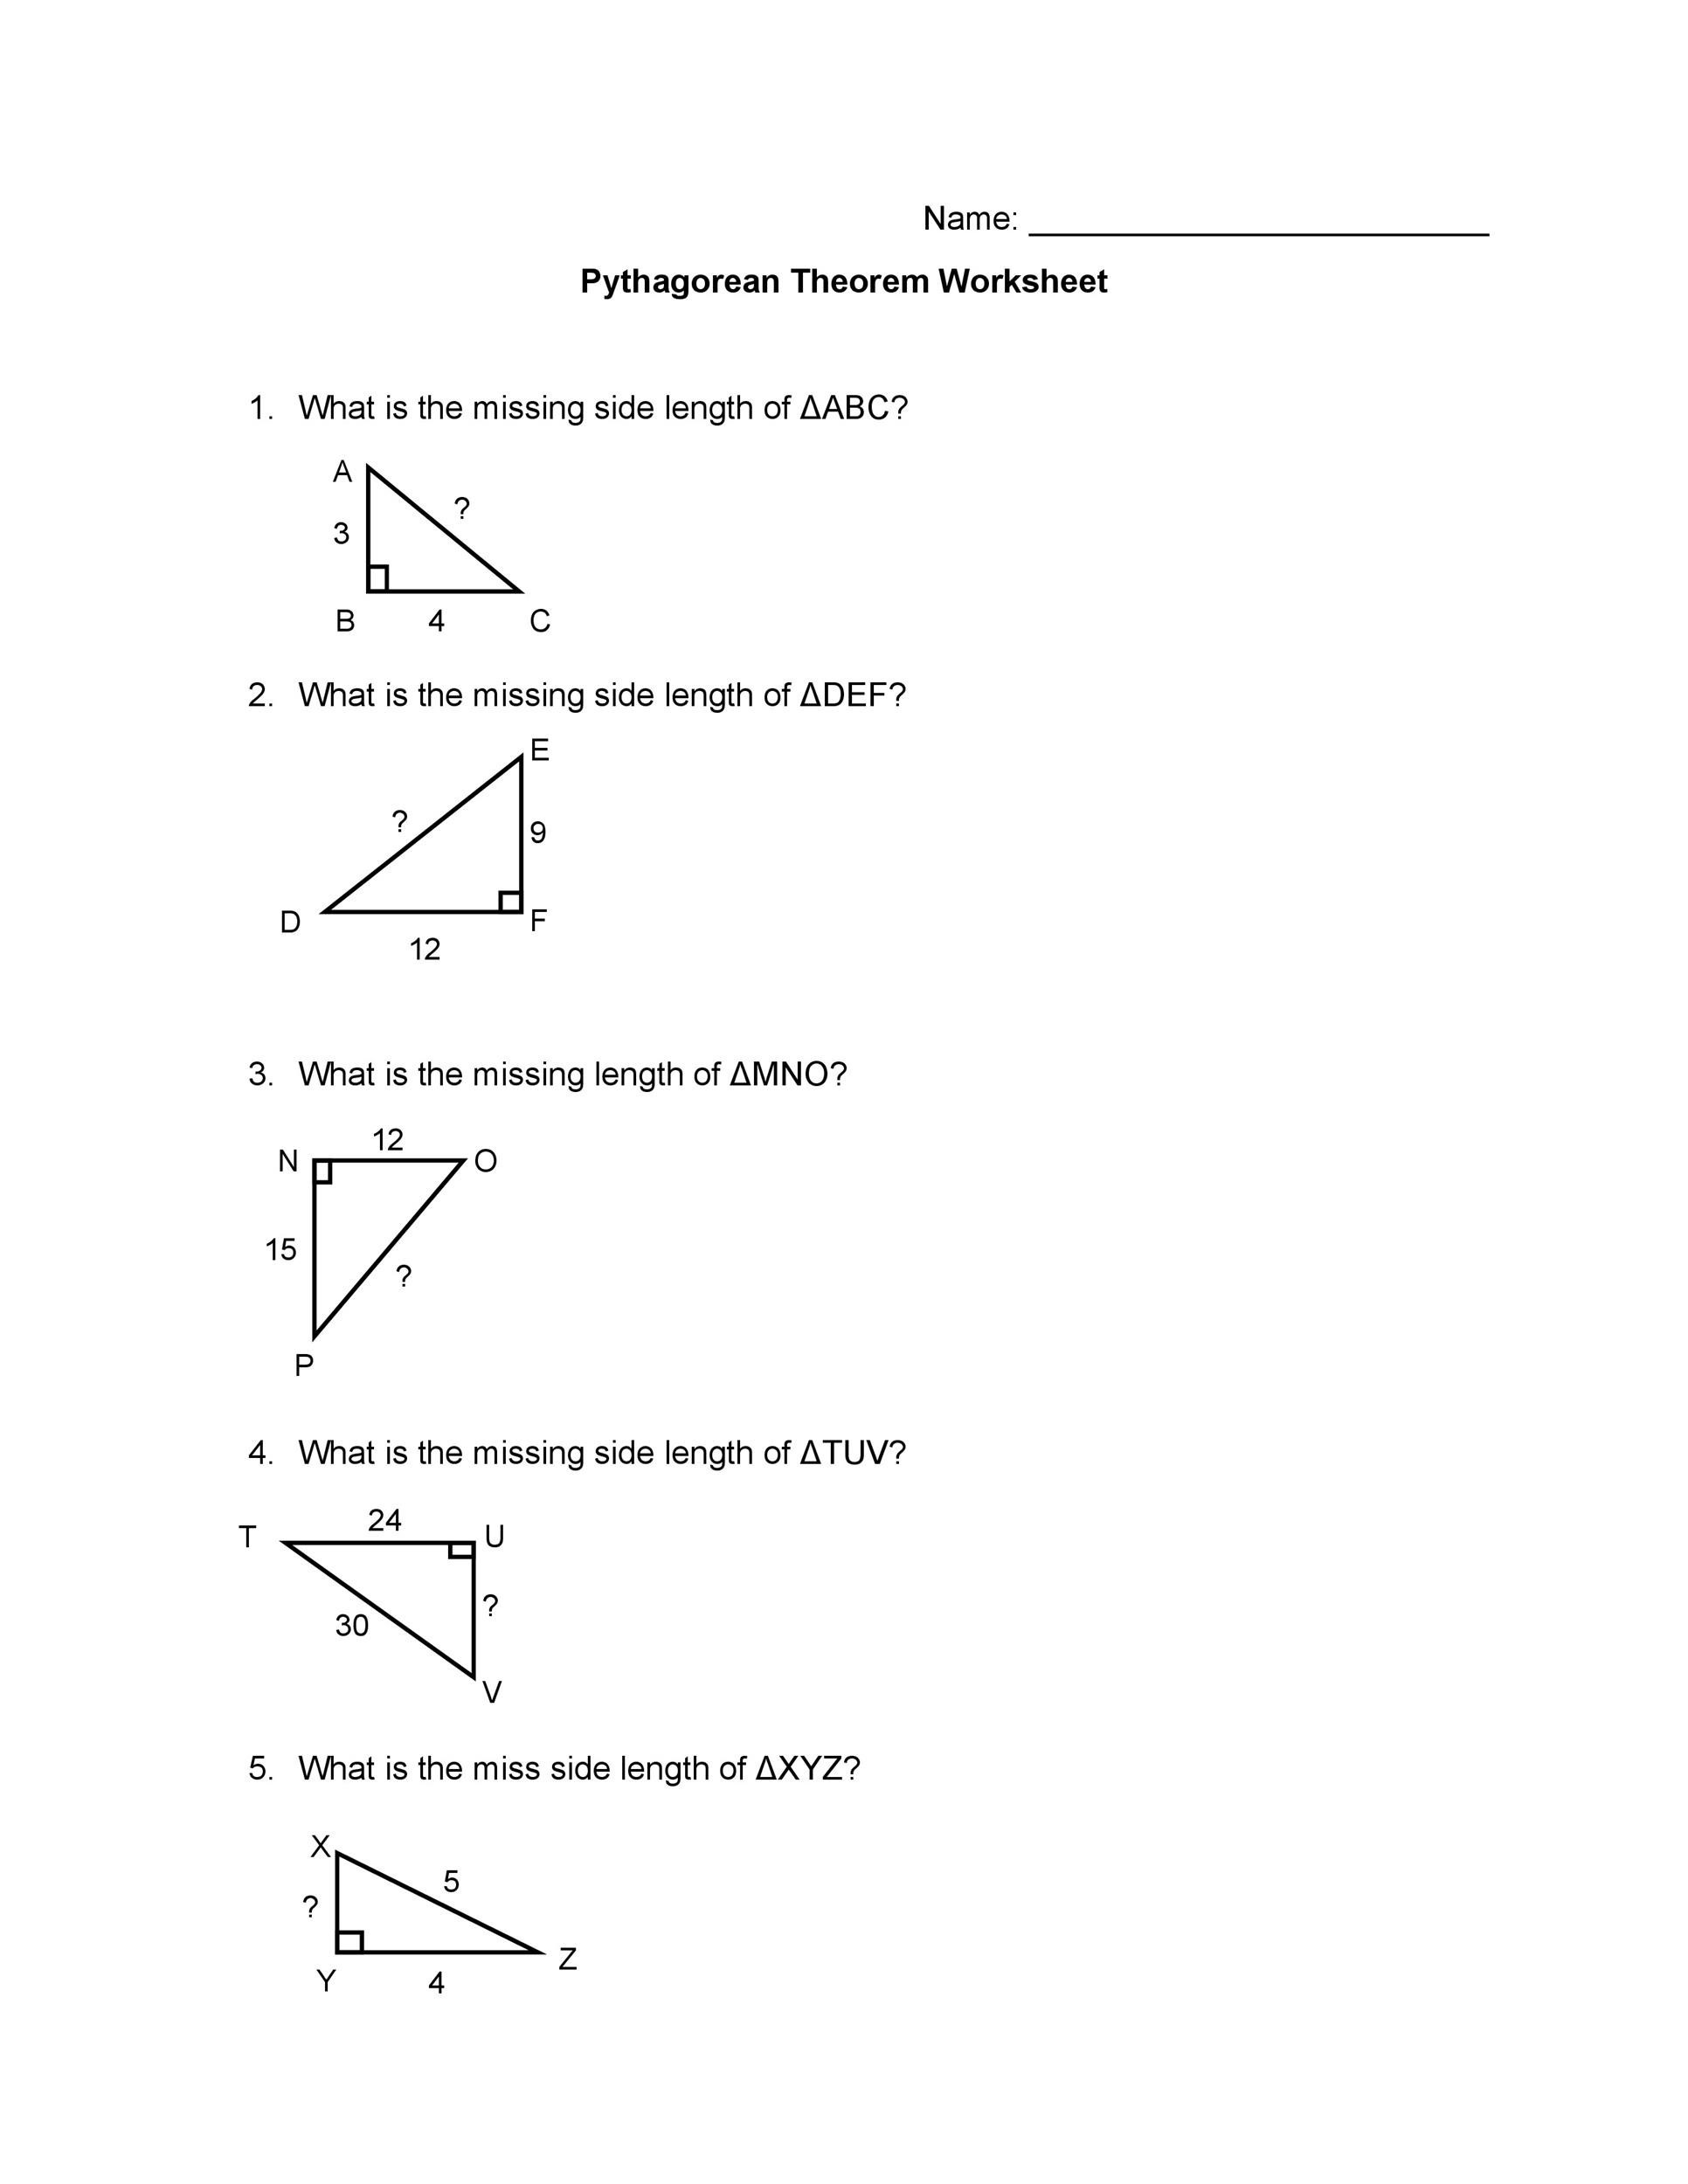 pythagorean-theorem-word-problems-worksheet-with-answers-inspirenetic